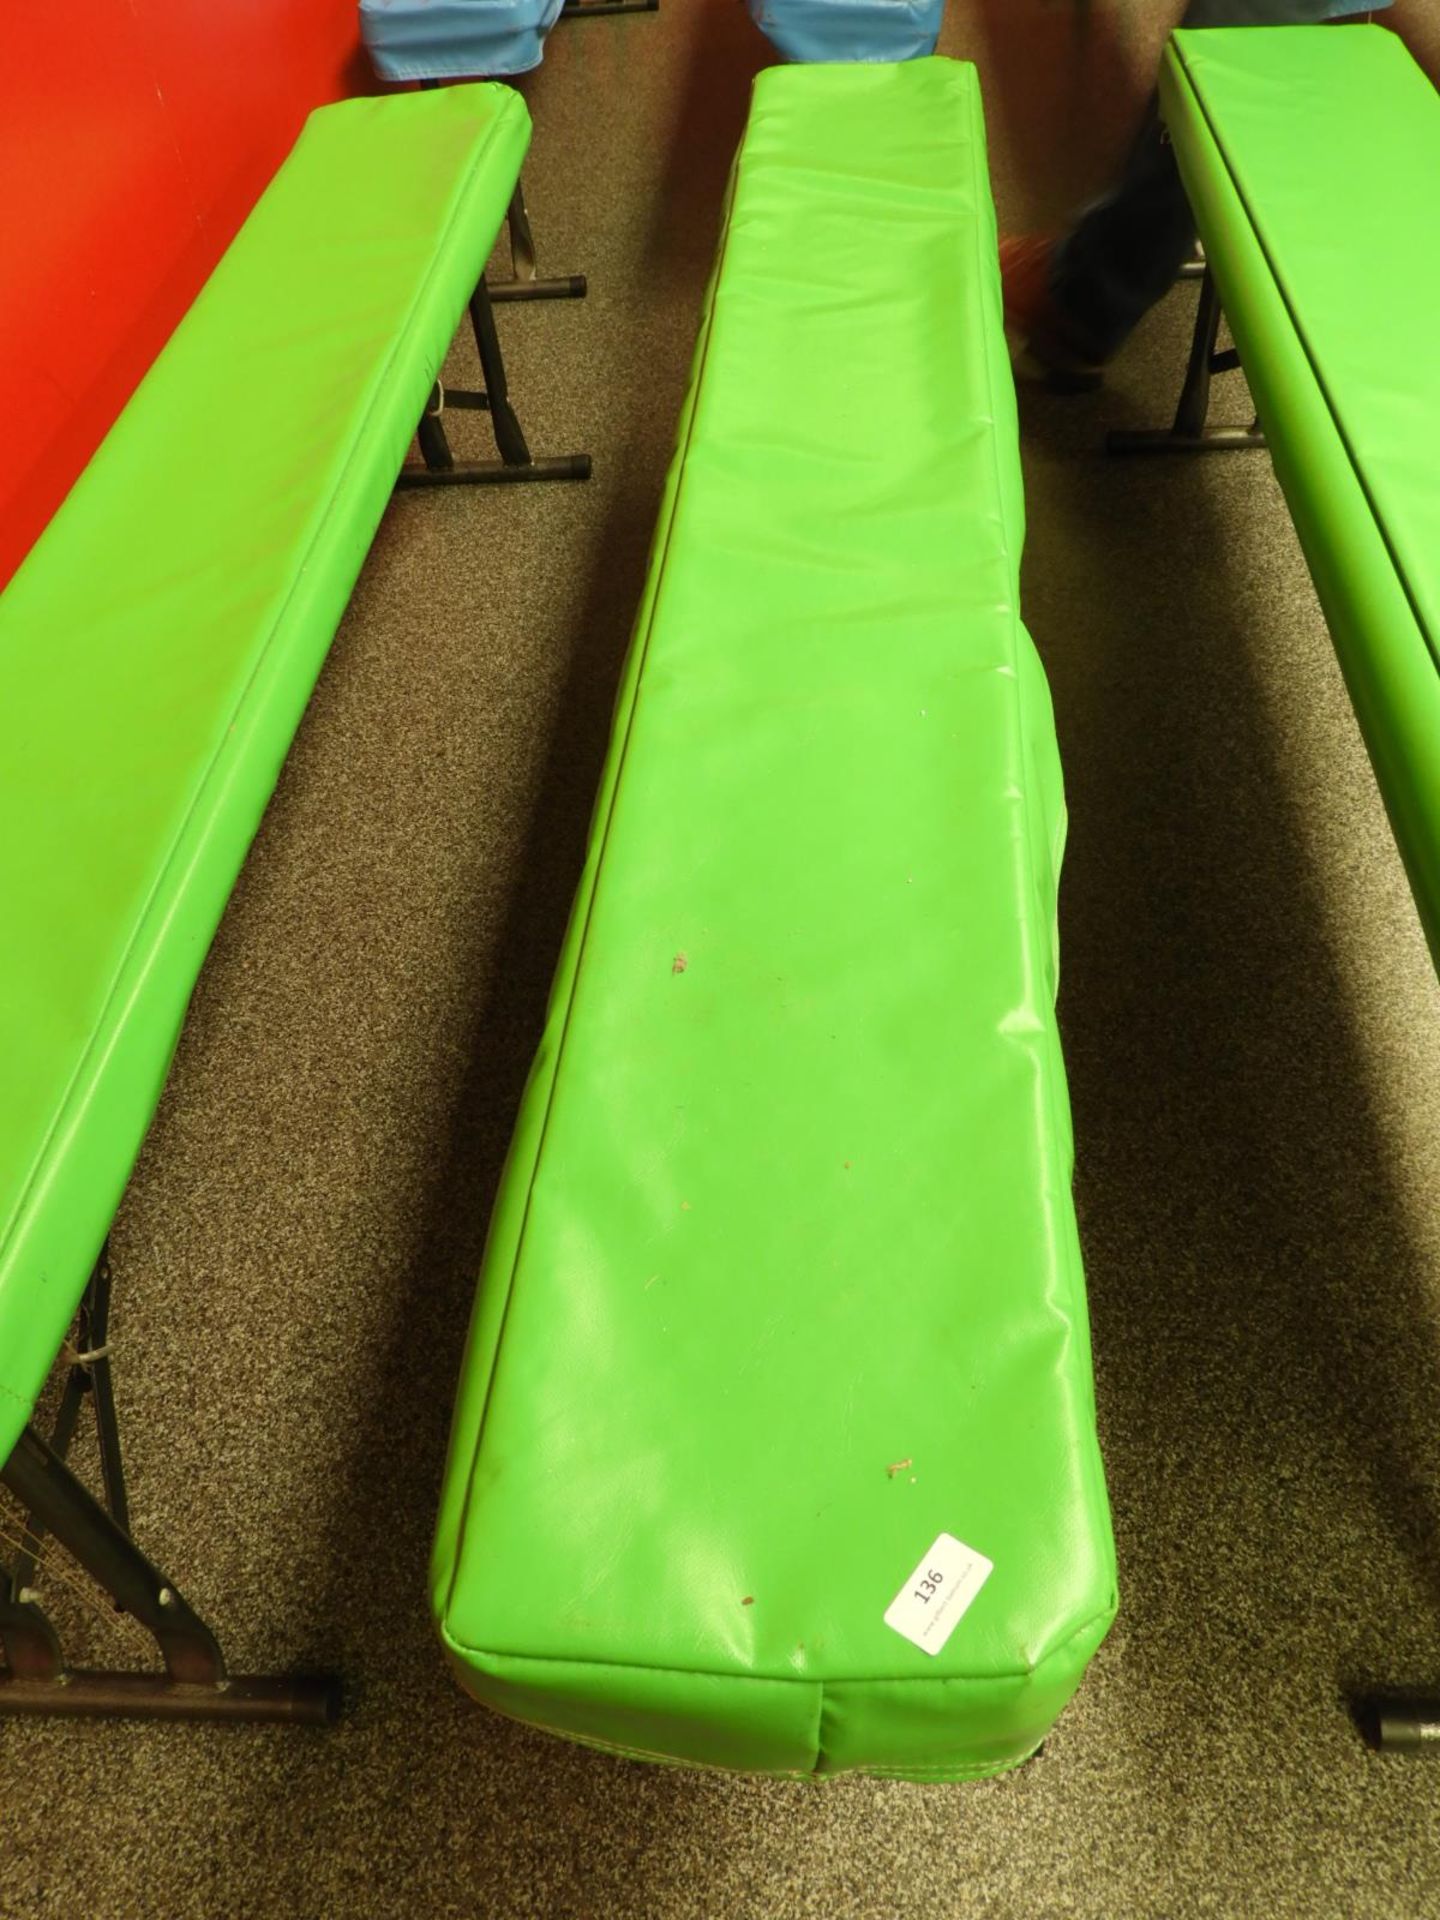 *Bench with Folding Legs and Green Vinyl Top